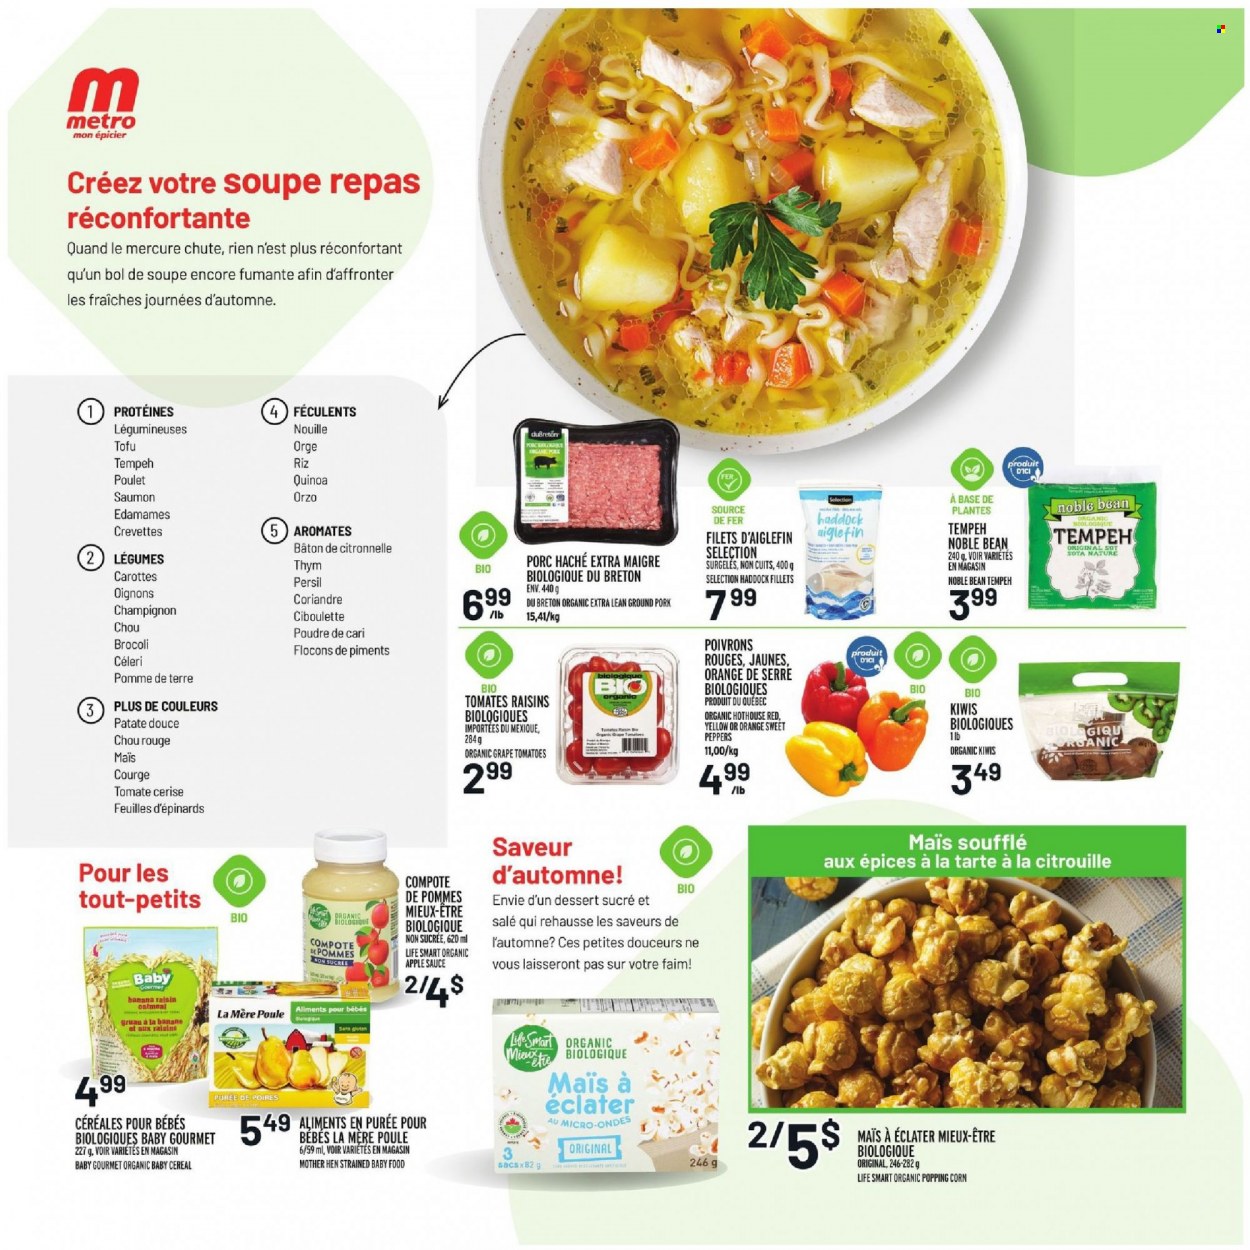 thumbnail - Metro Flyer - September 30, 2021 - October 06, 2021 - Sales products - corn, sweet peppers, tomatoes, peppers, haddock, sauce, tofu, compote, cereals, apple sauce, dried fruit, ground pork, Persil, kiwi, quinoa, raisins, oranges. Page 2.